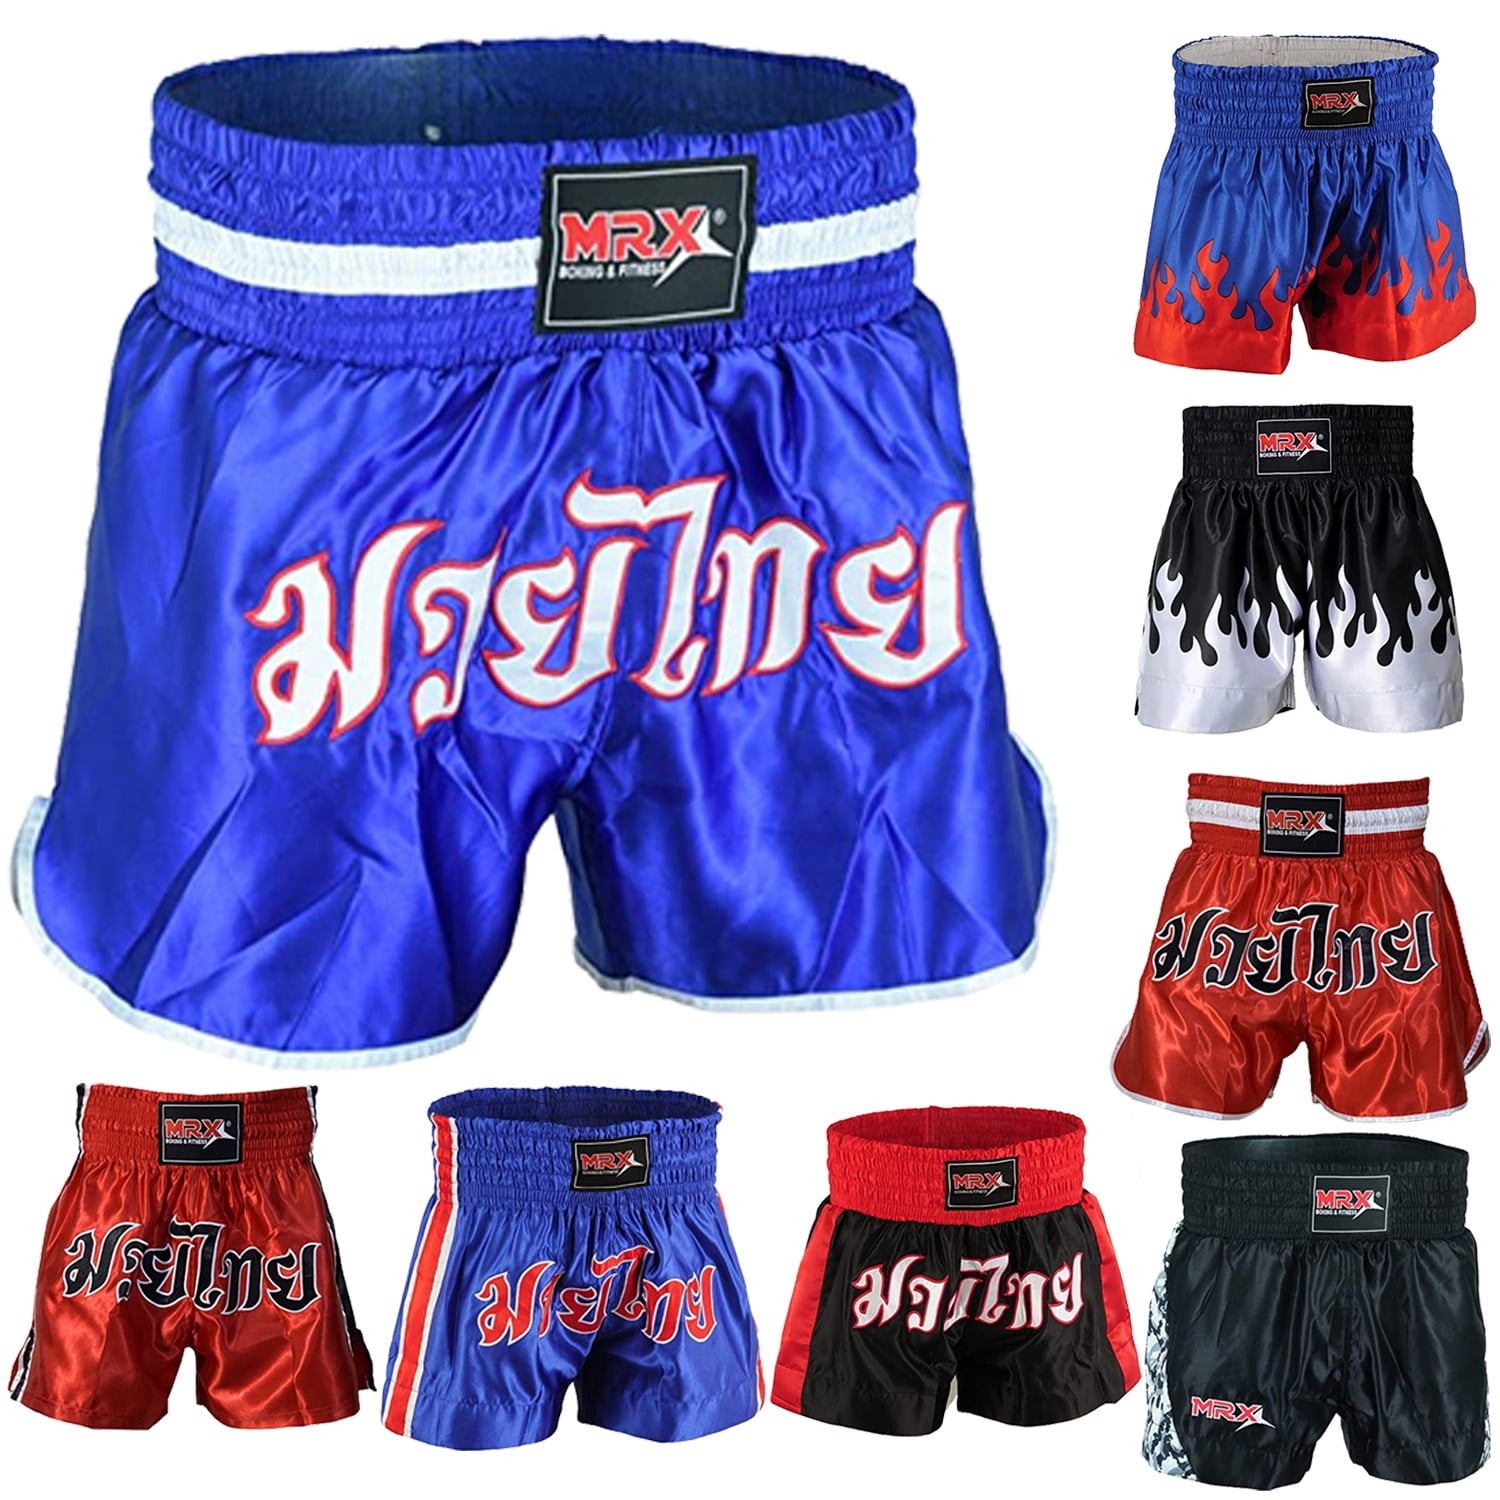 Men Boxing Shorts for Boxing Training Fitness Gym Cage Fight MMA Mauy Thai Kickboxing Trunks Clothing 